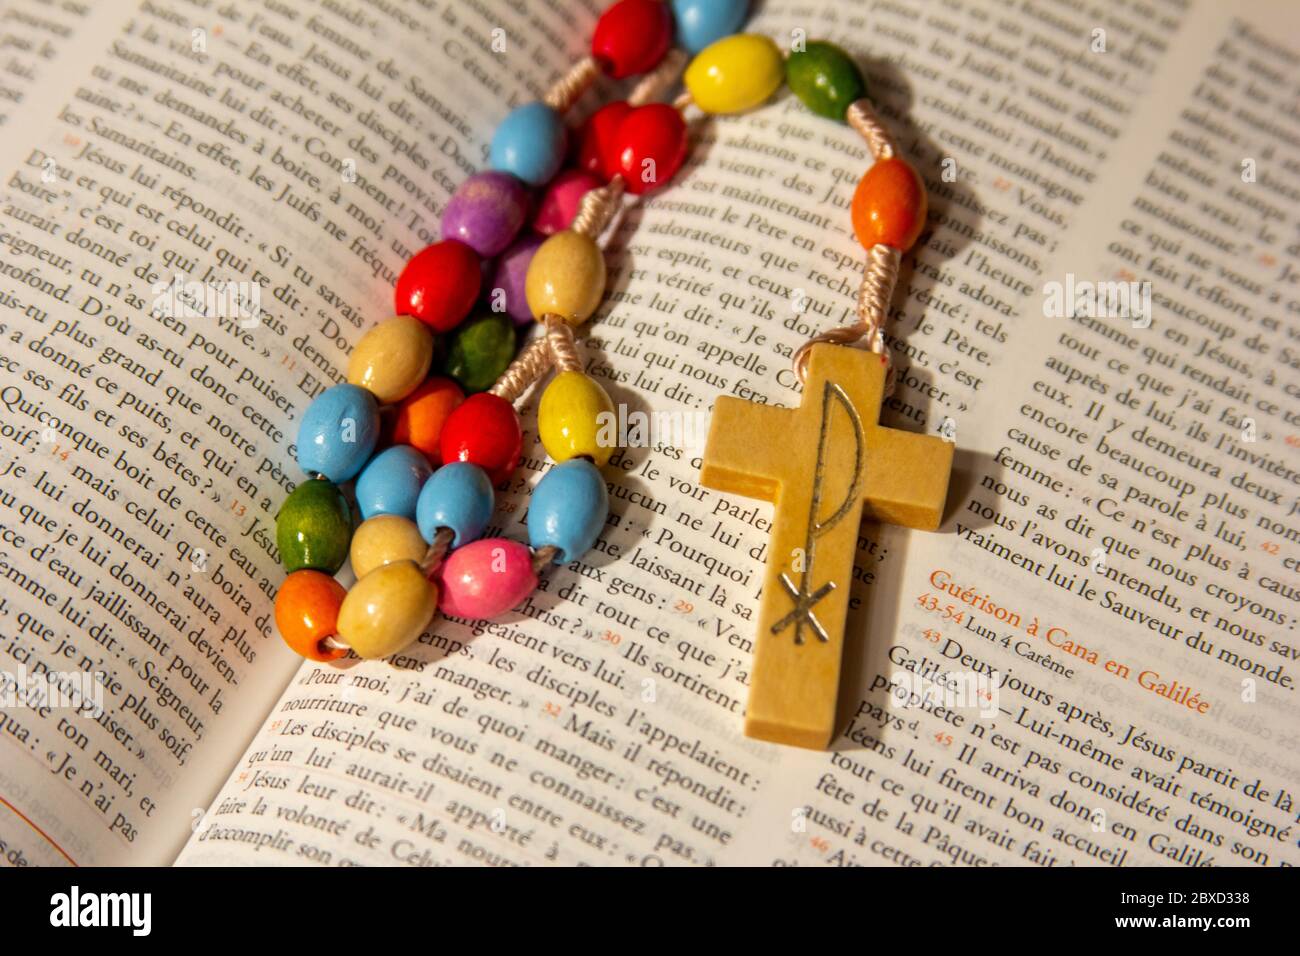 A rosary in an open Bible in French. Stock Photo